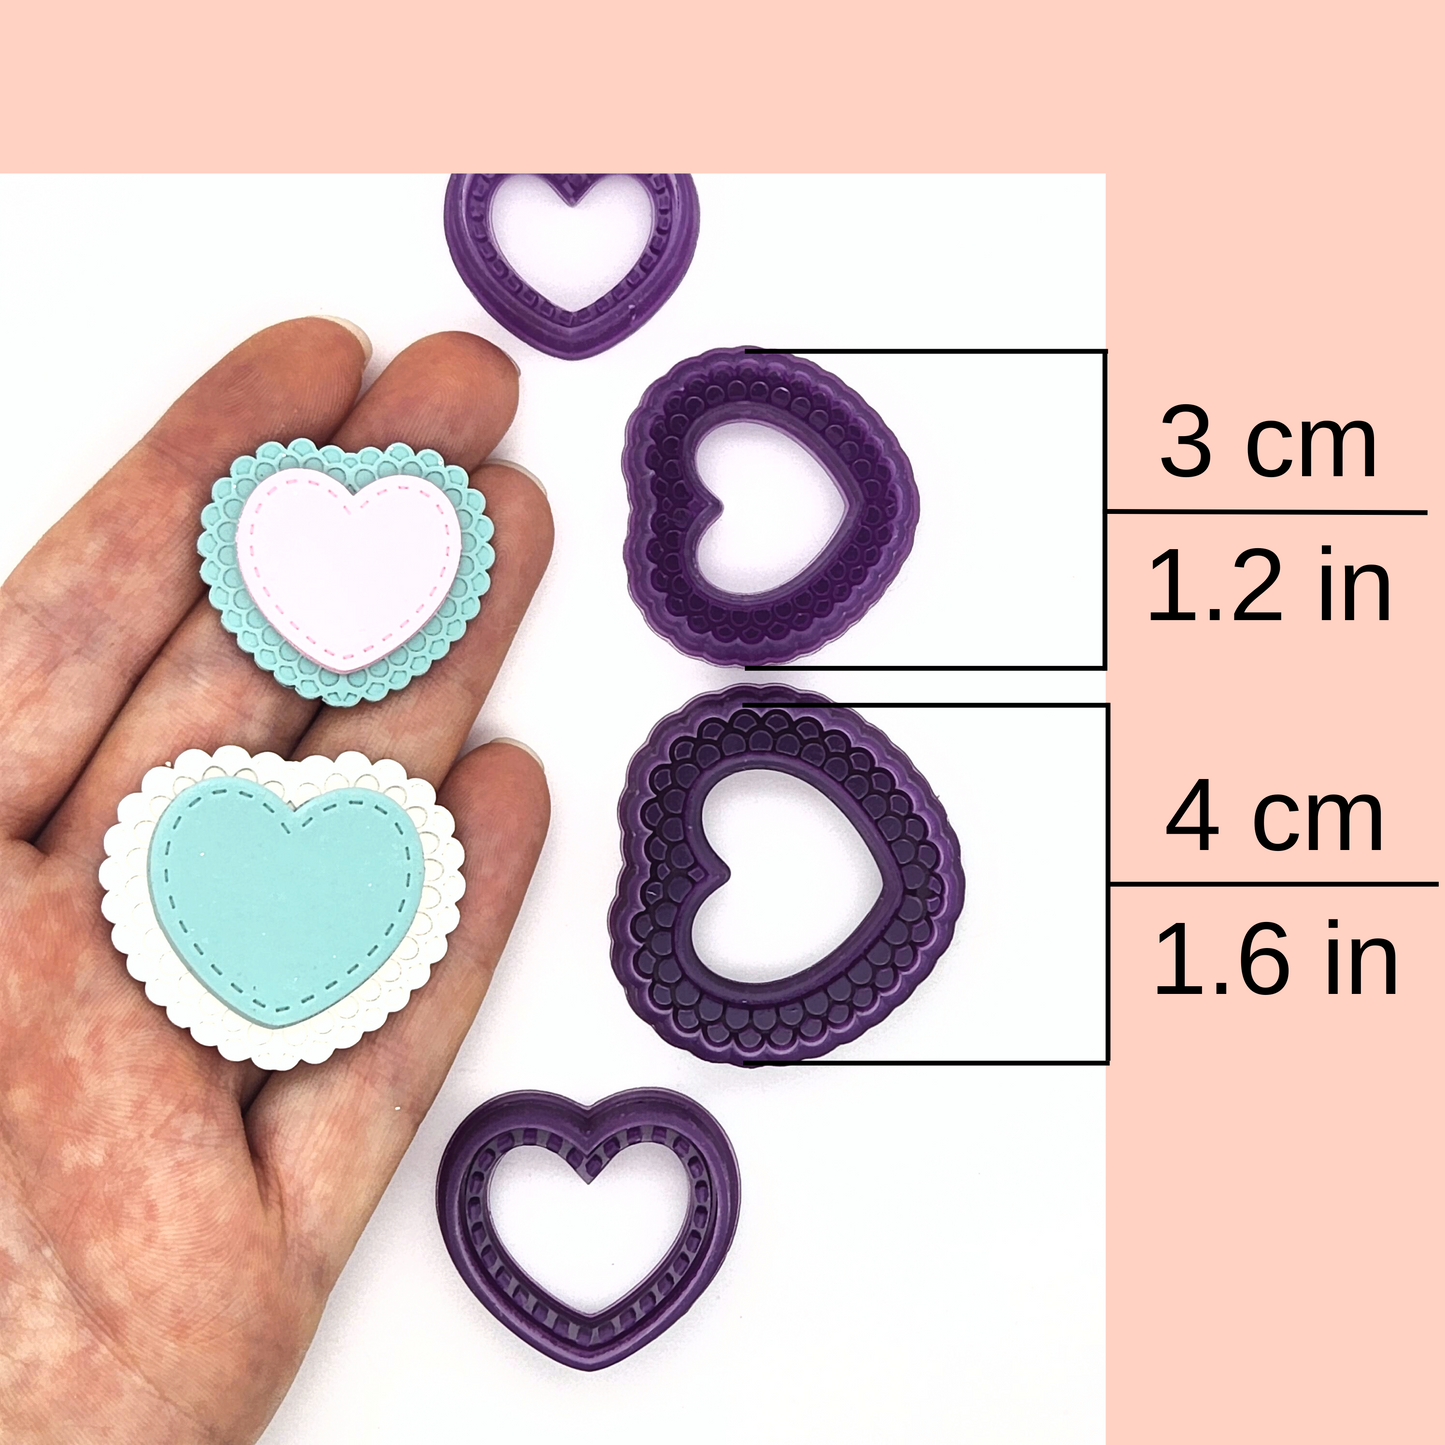 Stitched and Doily Heart polymer clay cutter set, available sizes: 3 centimeters / 1.2 inches, and 4 centimeters / 1.6 inches